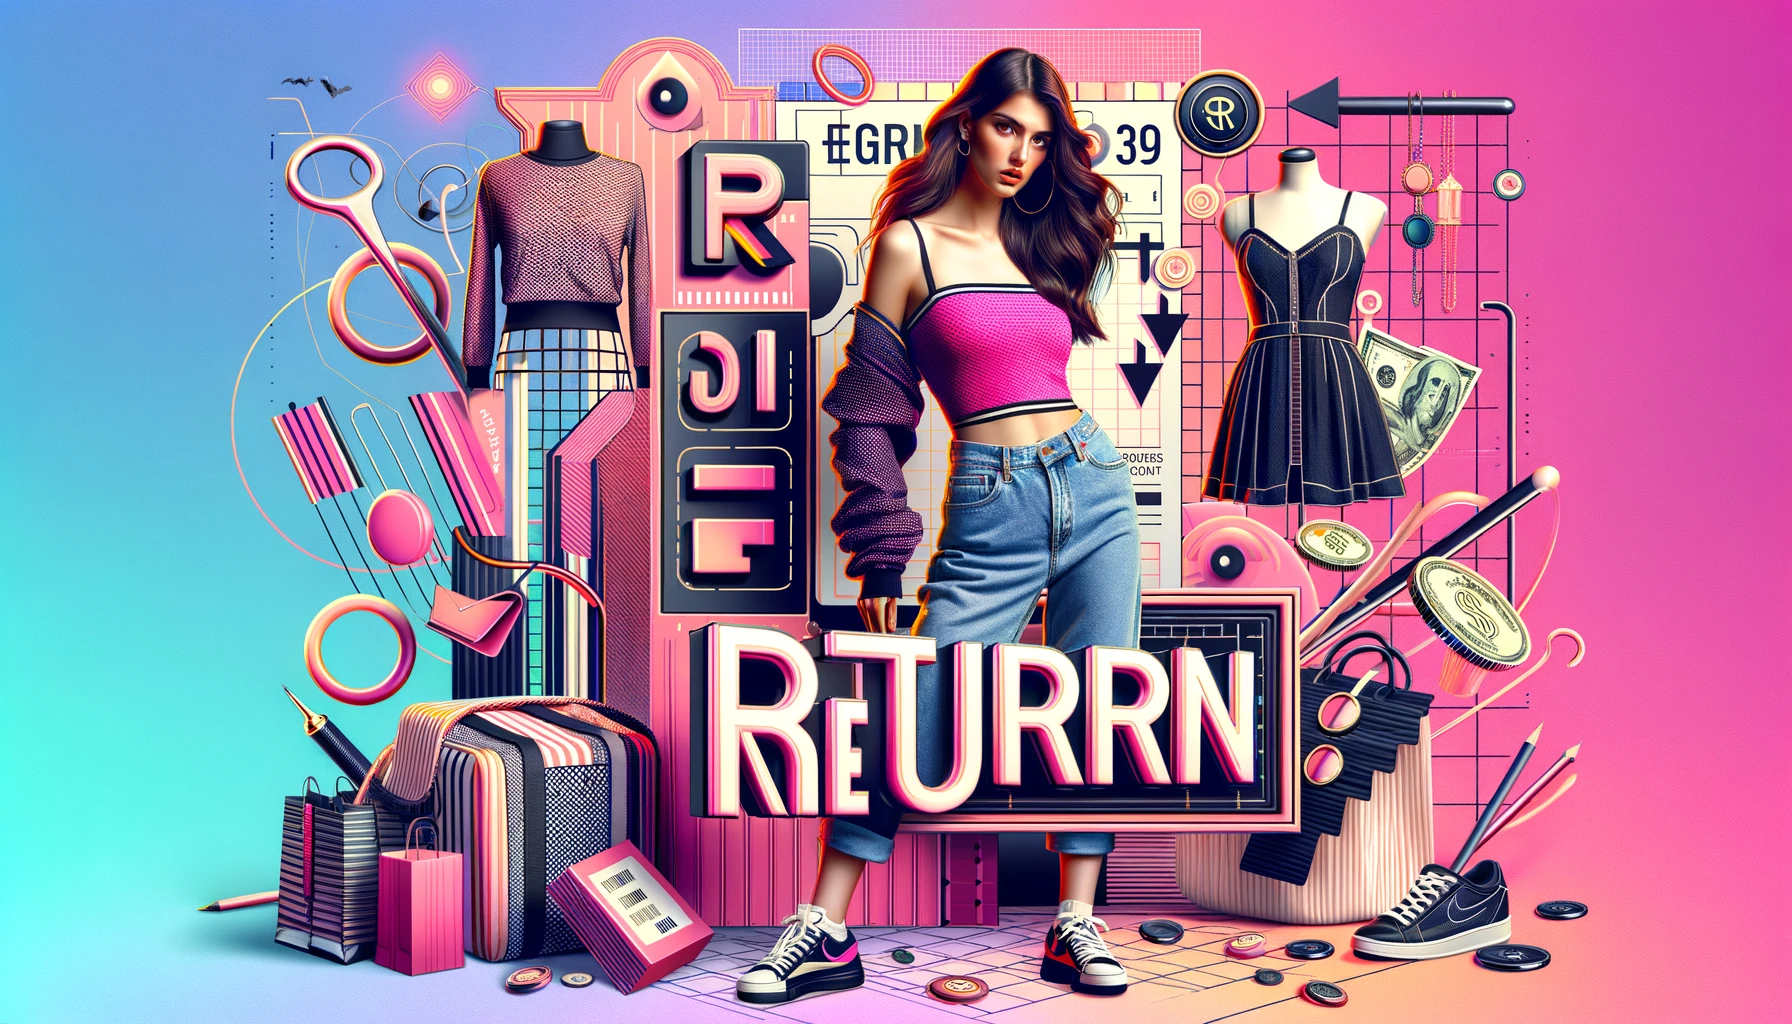 A stylish layout for a women's budget fashion brand named 'GRL' with a focus on returns. The image features trendy and affordable clothing items displayed attractively, with visual elements representing the return process. Incorporate the word 'GRL' prominently in the design. The background should be vibrant and fashionable, reflecting the brand's appeal to young women. The image should be in a 16:9 aspect ratio.